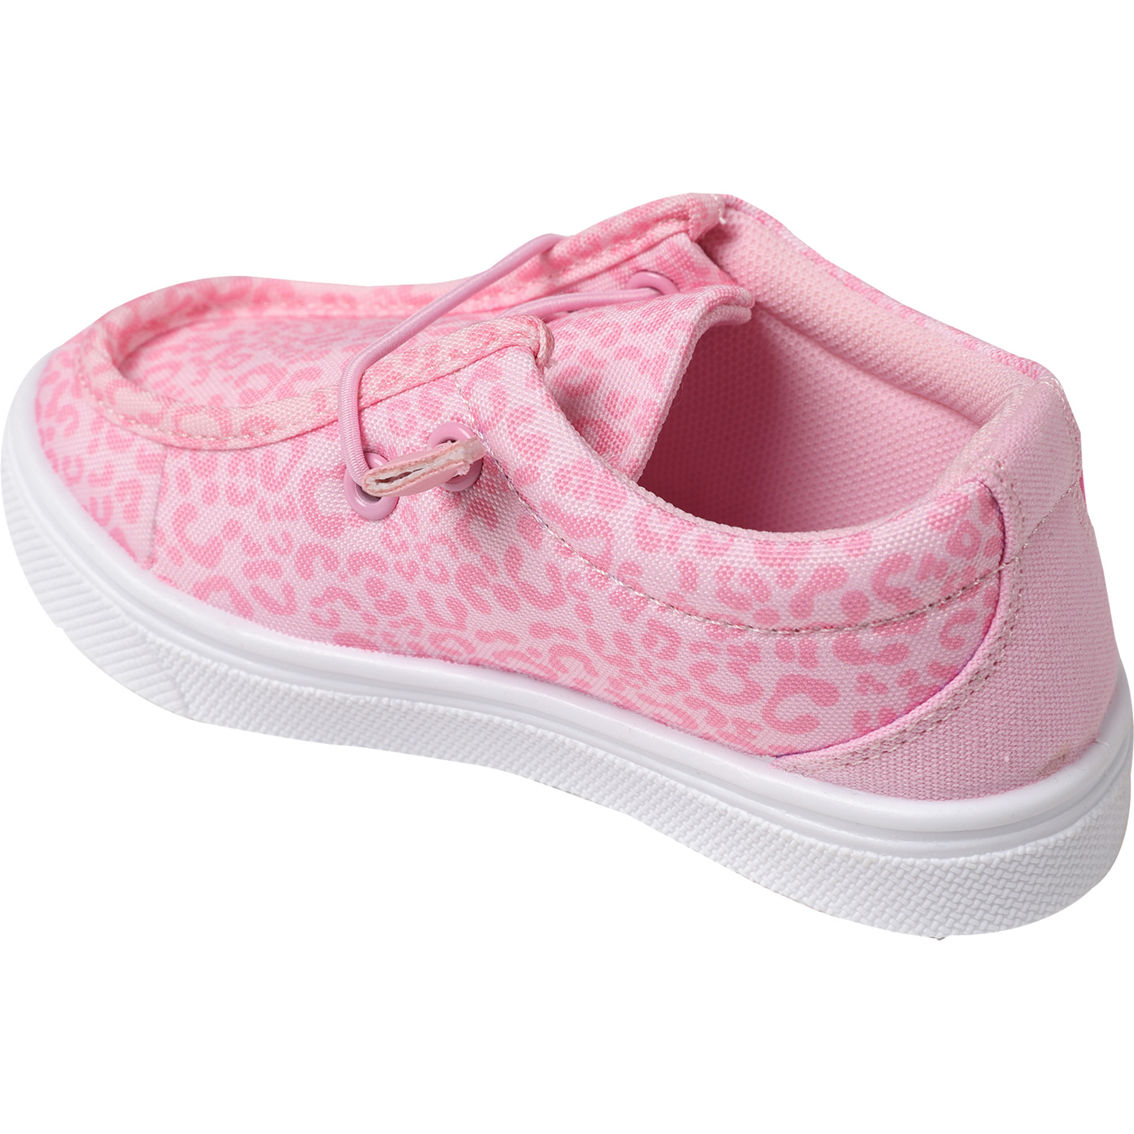 Oomphies Toddler Girls Parker Shoes - Image 3 of 4